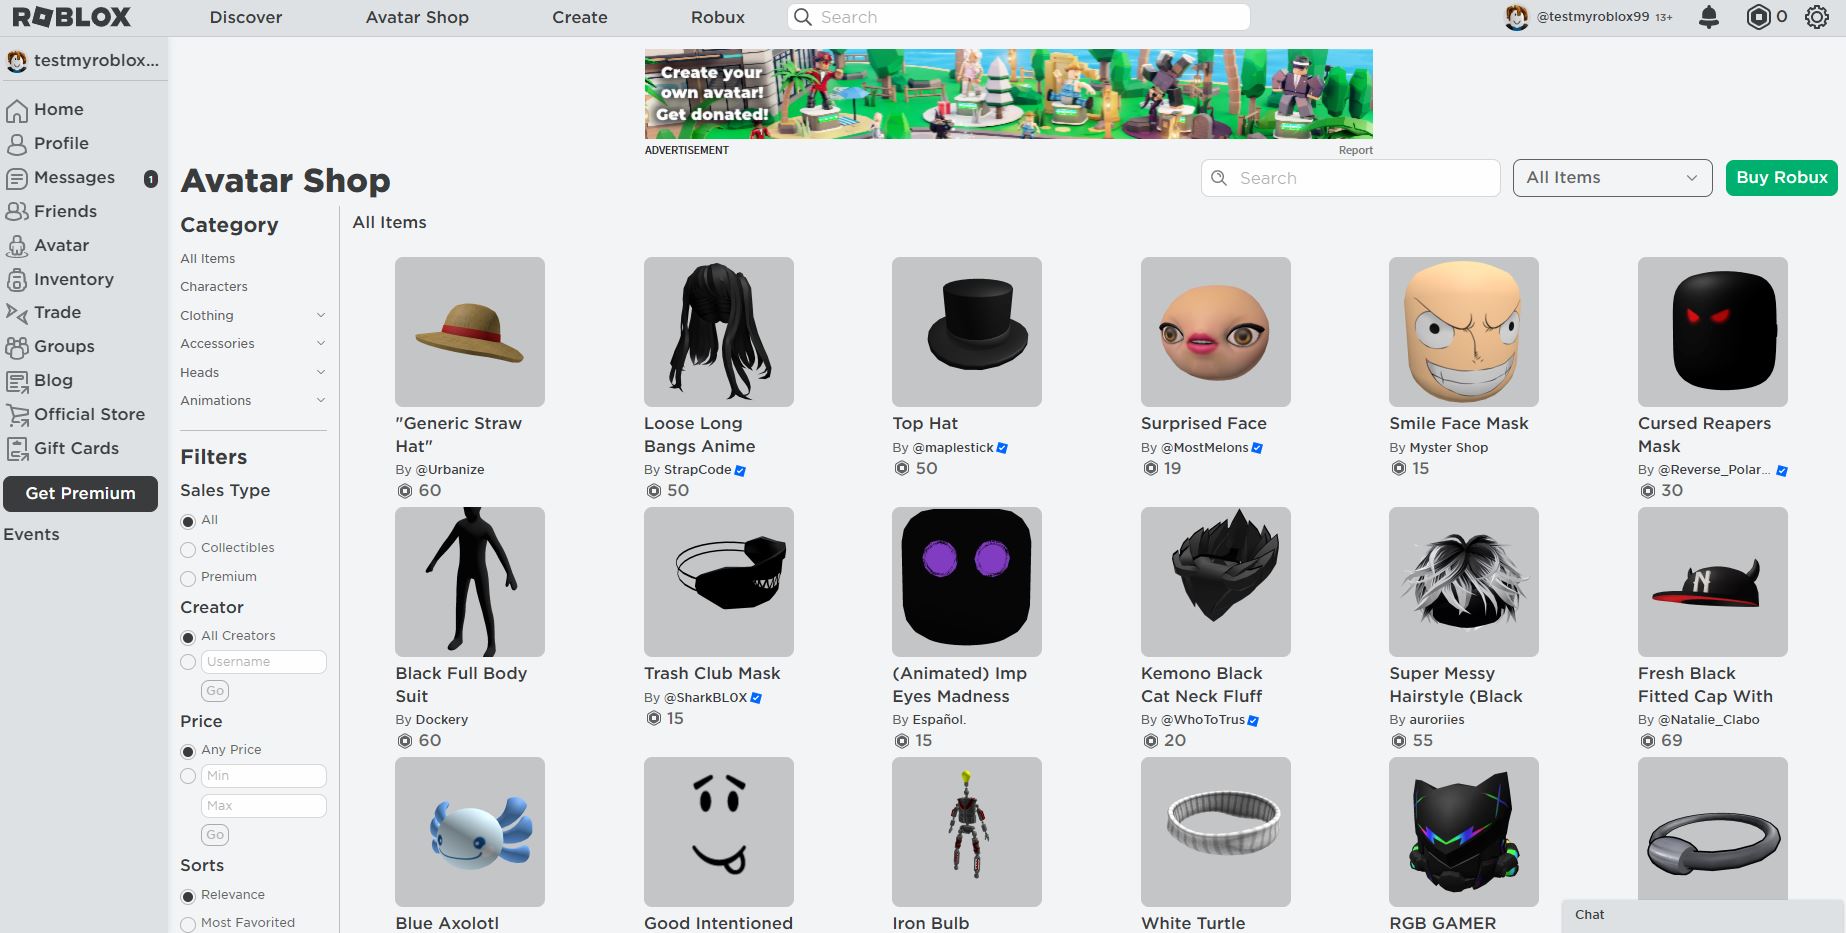 Where to use Robux?